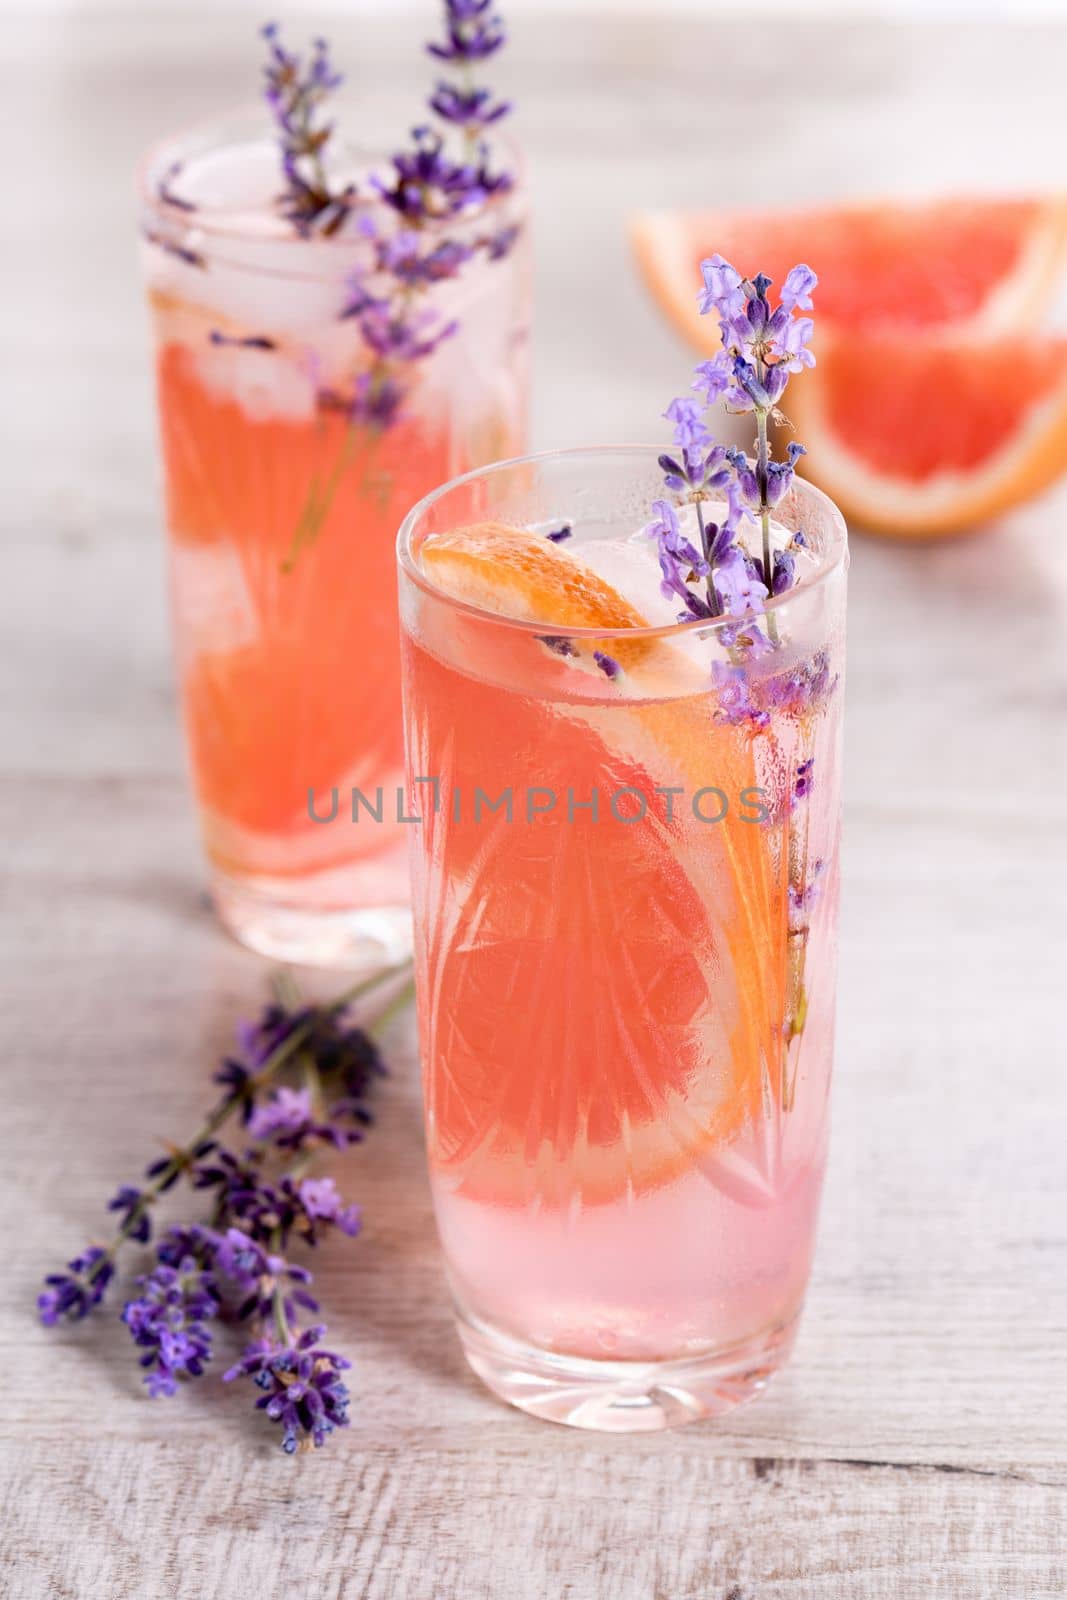 Grapefruit and lavender cocktail by Apolonia